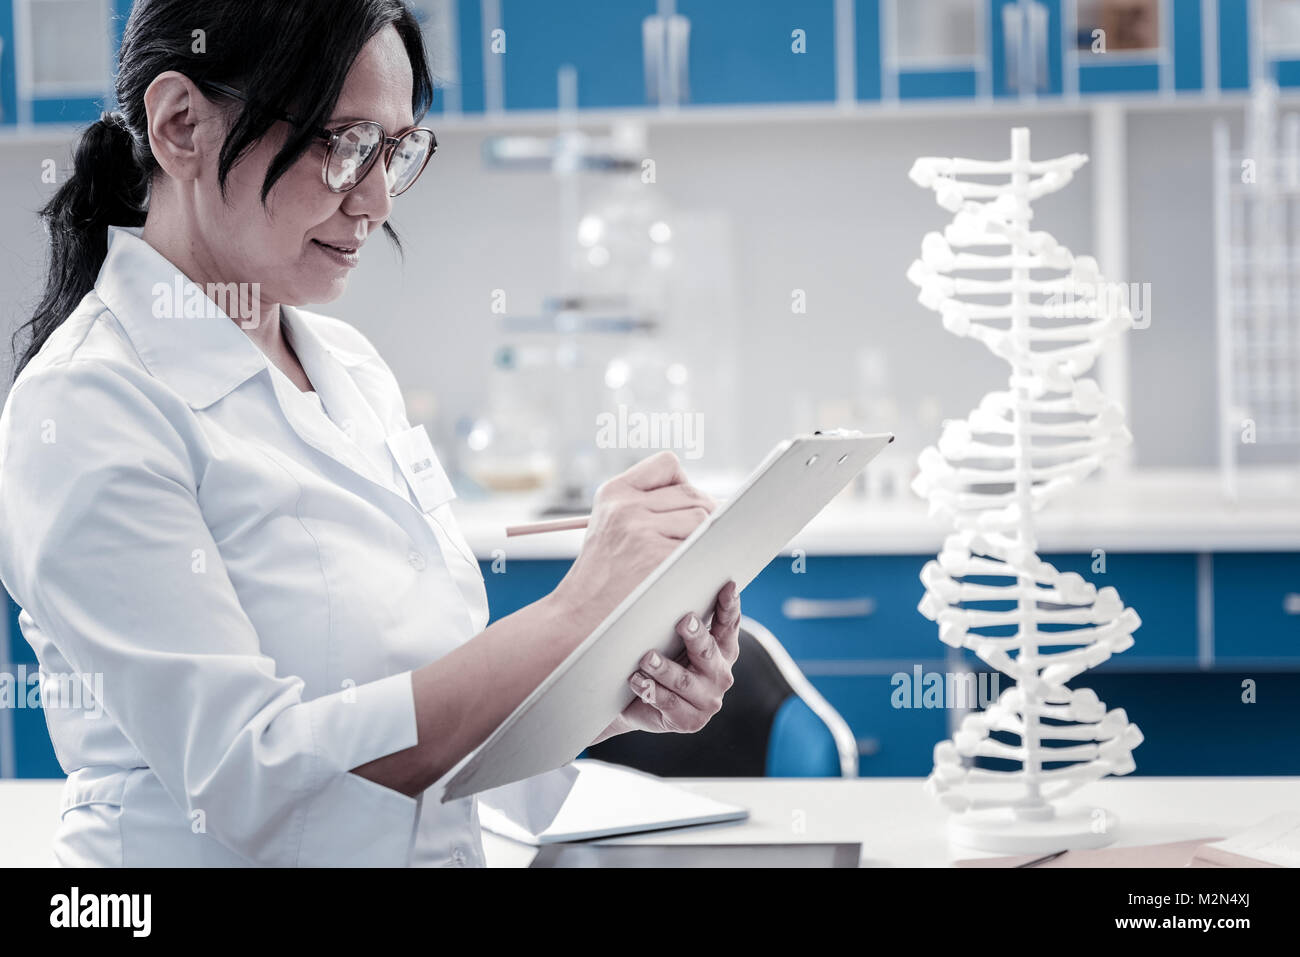 Concentrated mature lady writing something down in laboratory Stock Photo